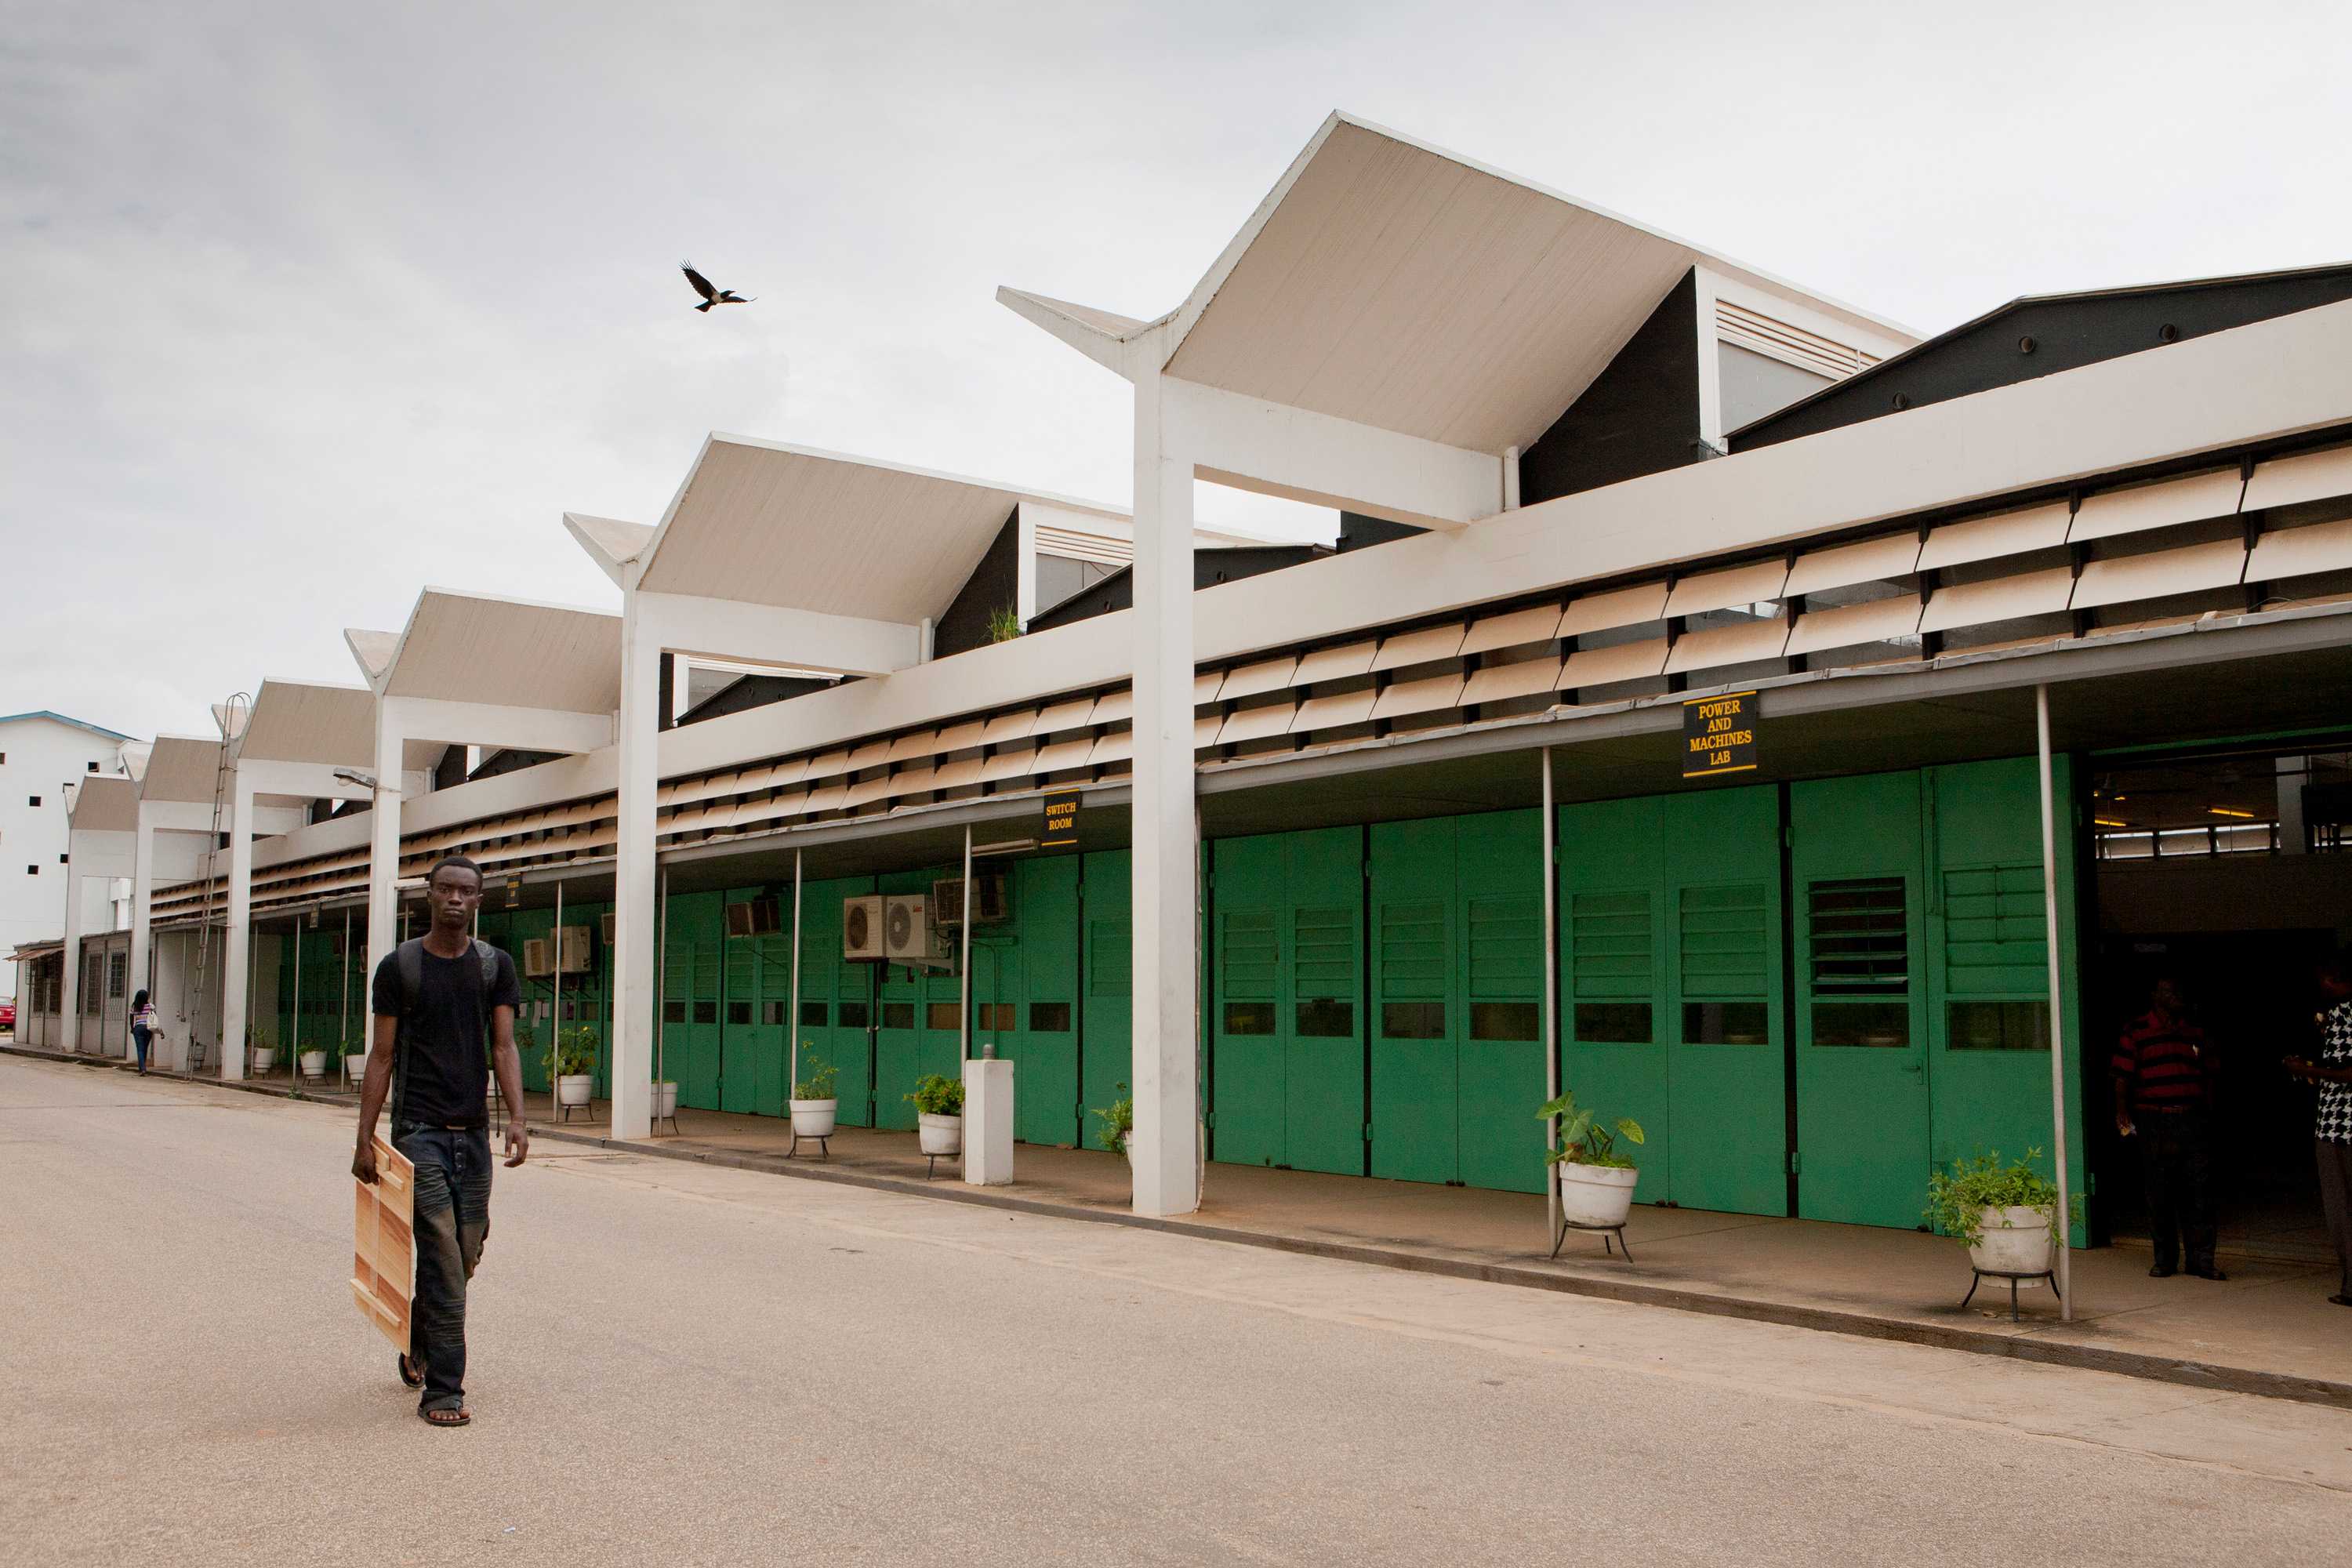 The School of Engineering at Kwame Nkrumah University of Science and Technology is one level building with bright green doors.